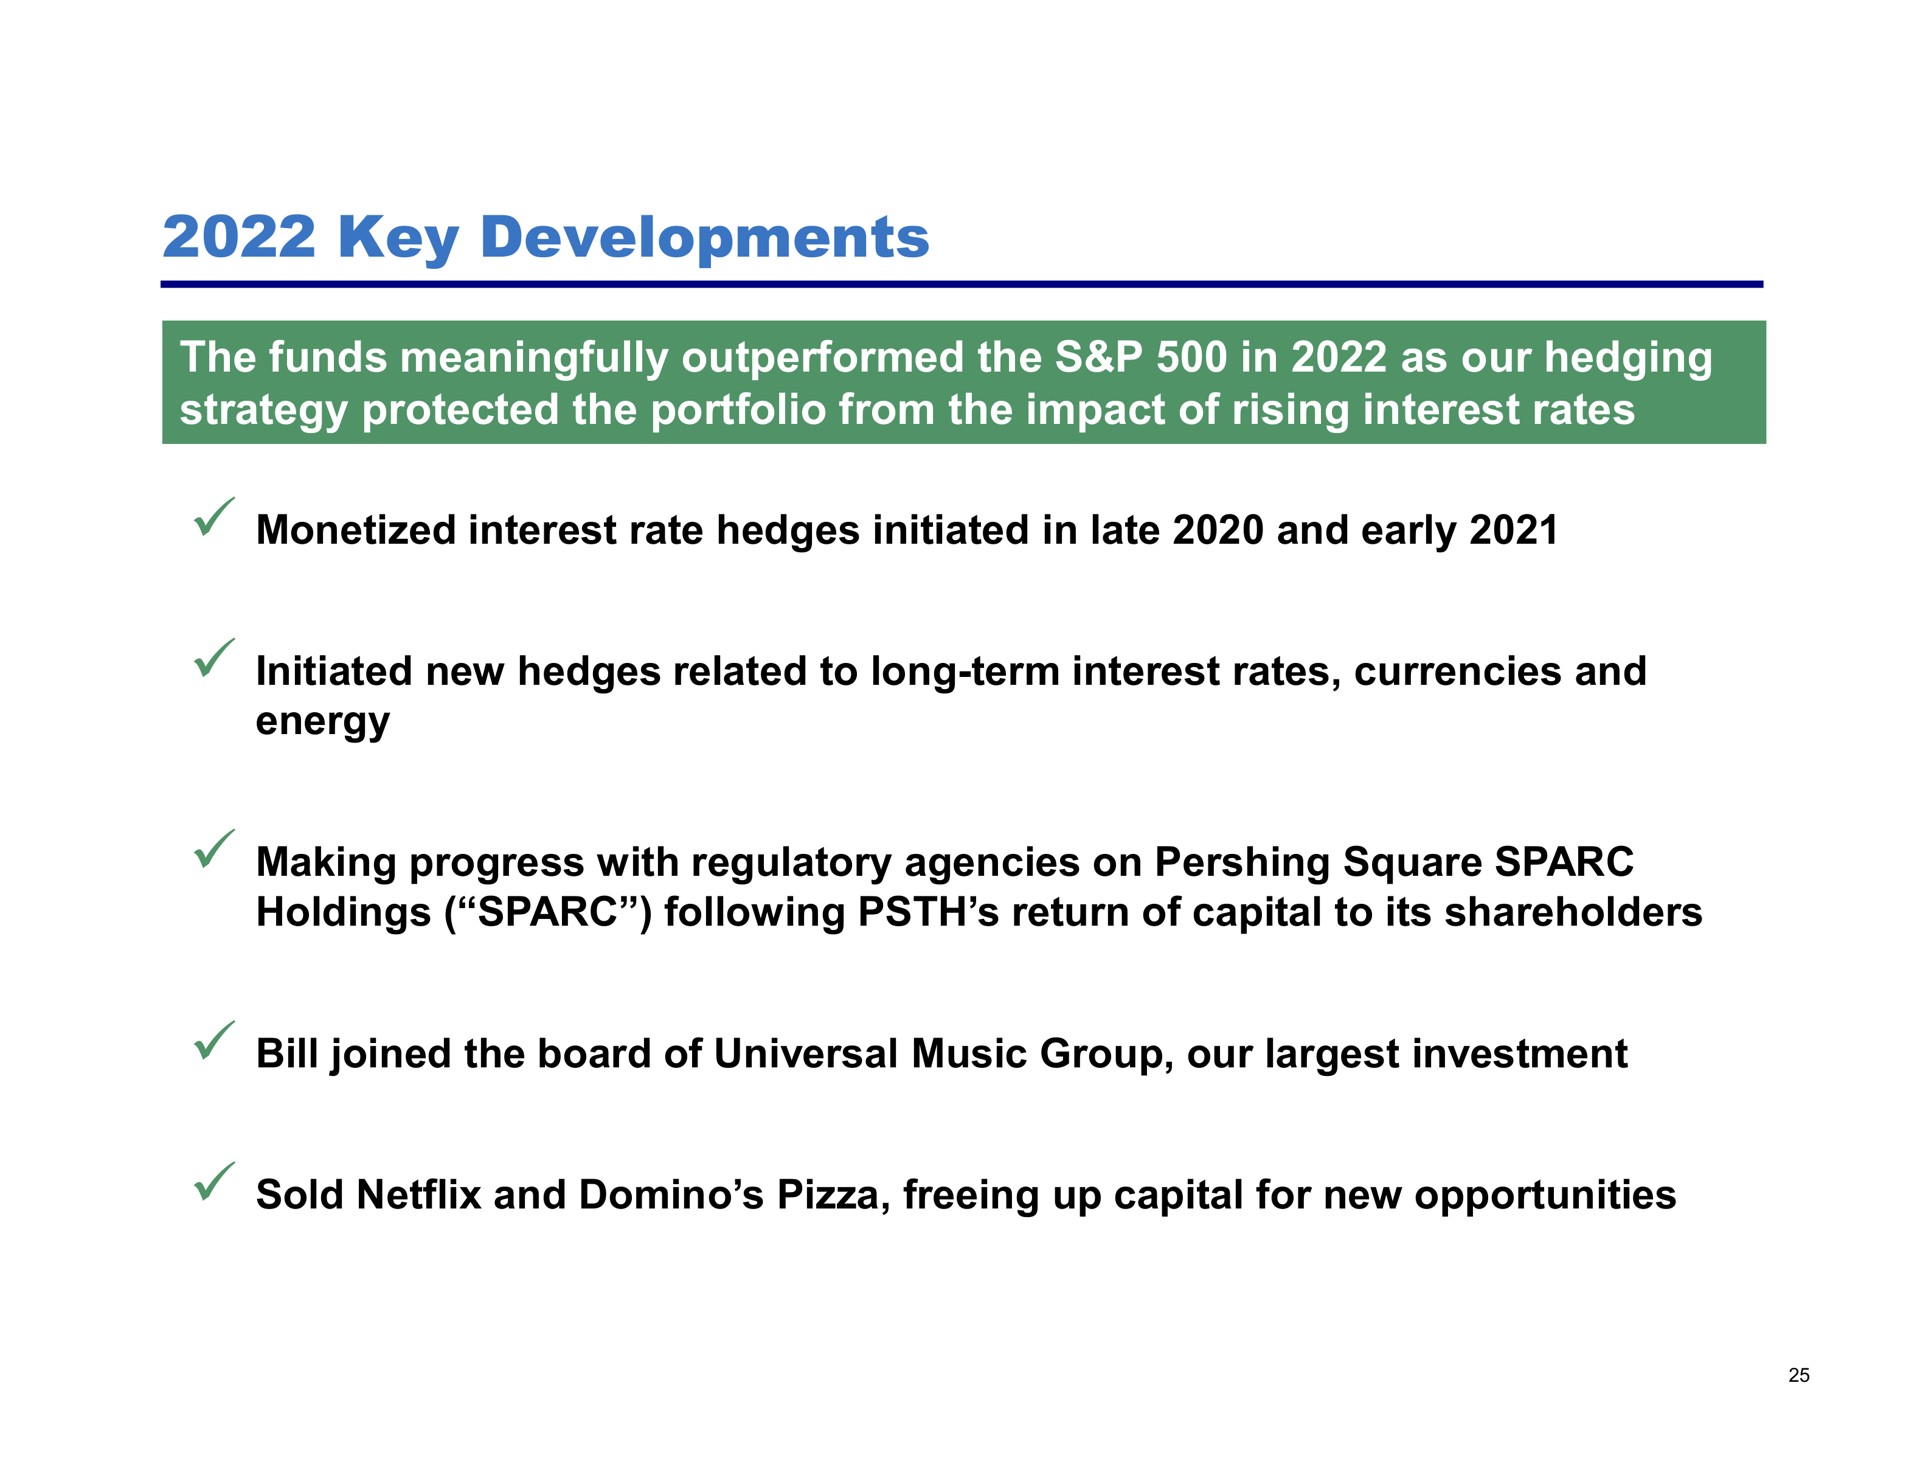 key developments the funds meaningfully outperformed the in as our hedging strategy protected the portfolio from the impact of rising interest rates monetized interest rate hedges initiated in late and early initiated new hedges related to long term interest rates currencies and energy making progress with regulatory agencies on square holdings following return of capital to its shareholders bill joined the board of universal music group our investment sold and domino pizza freeing up capital for new opportunities | Pershing Square